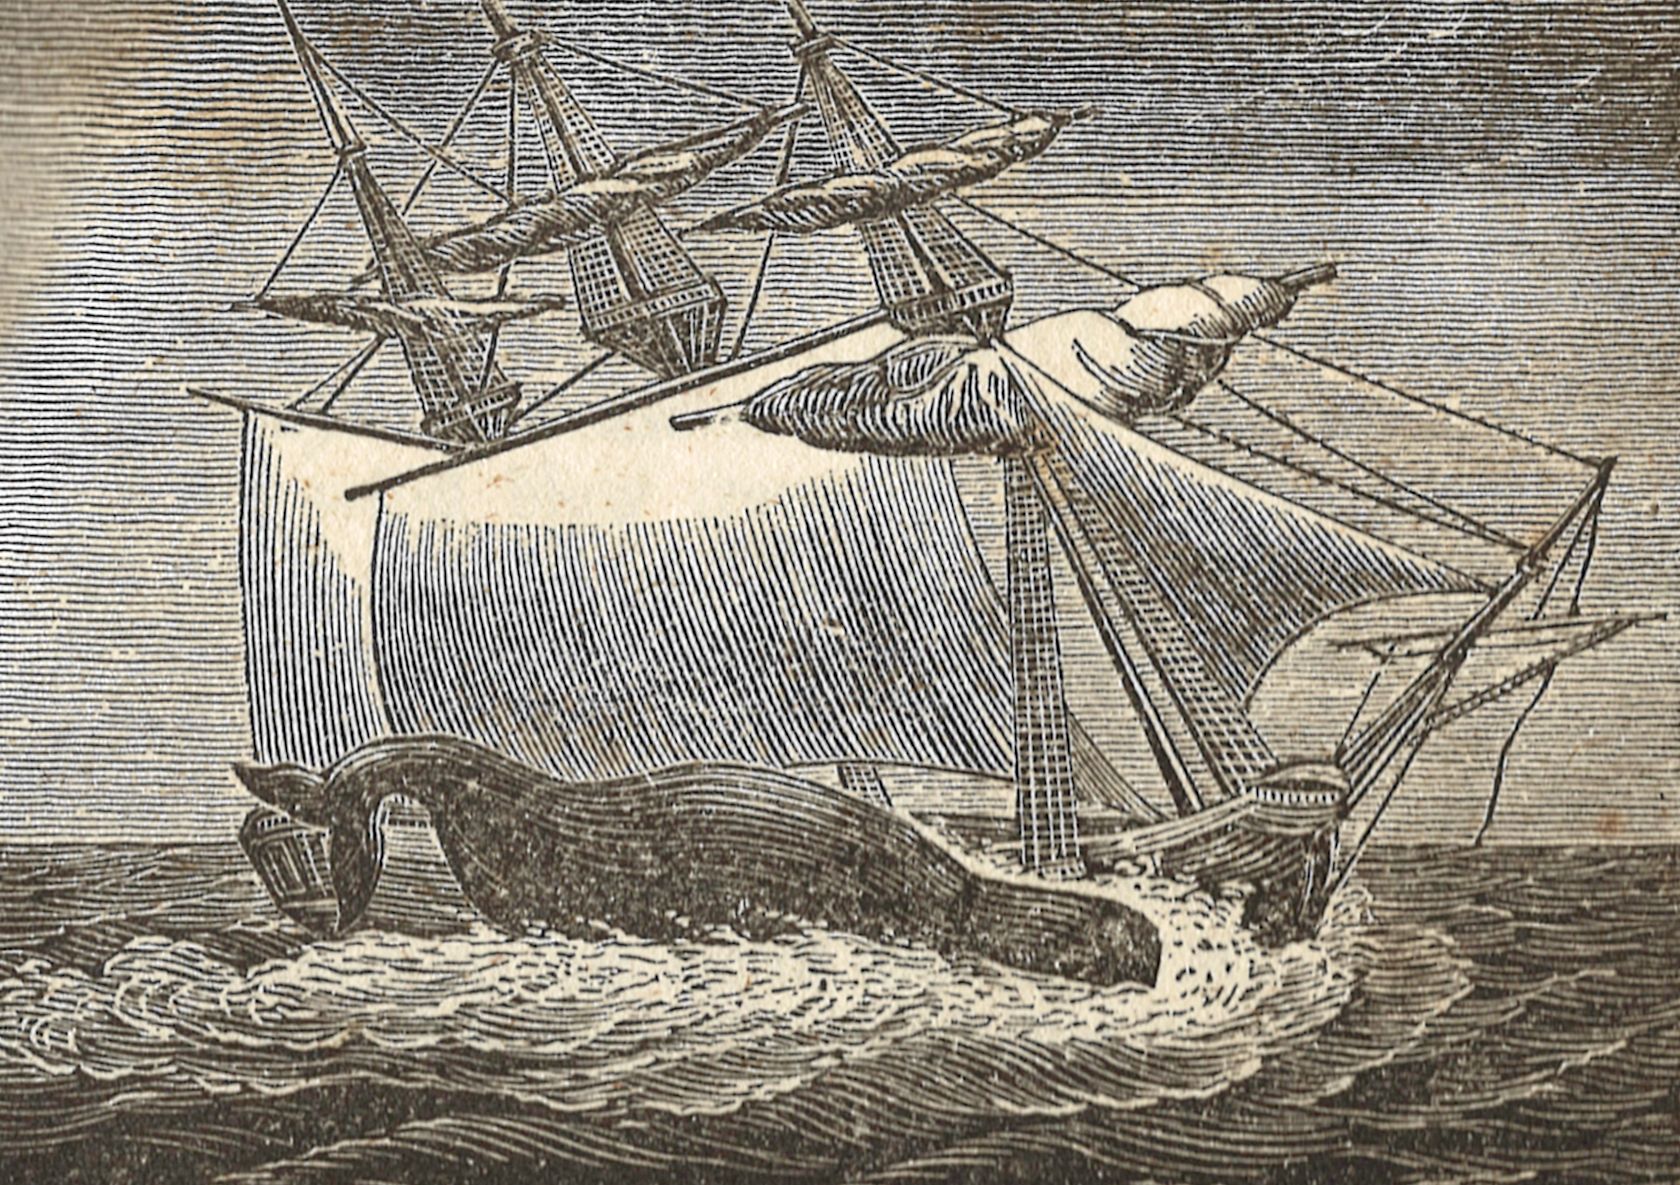 On November 20, 1820, the Essex was struck by a whale in the middle of the Pacific Ocean and sunk almost immediately, stranding her crew in small boats thousands of miles from land.